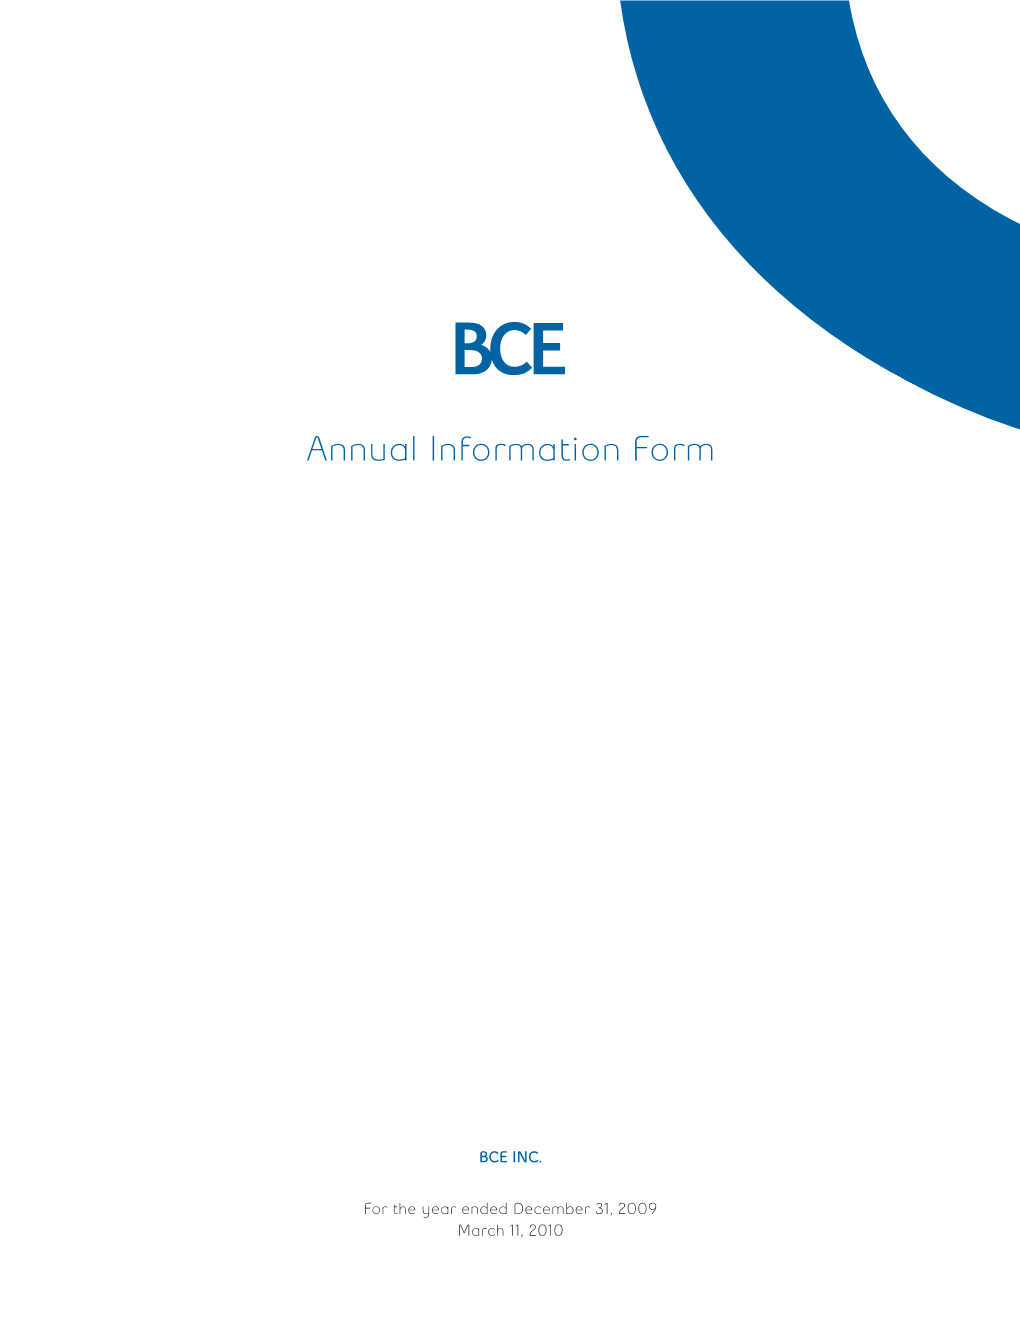 BCE 2009 Annual Information Form